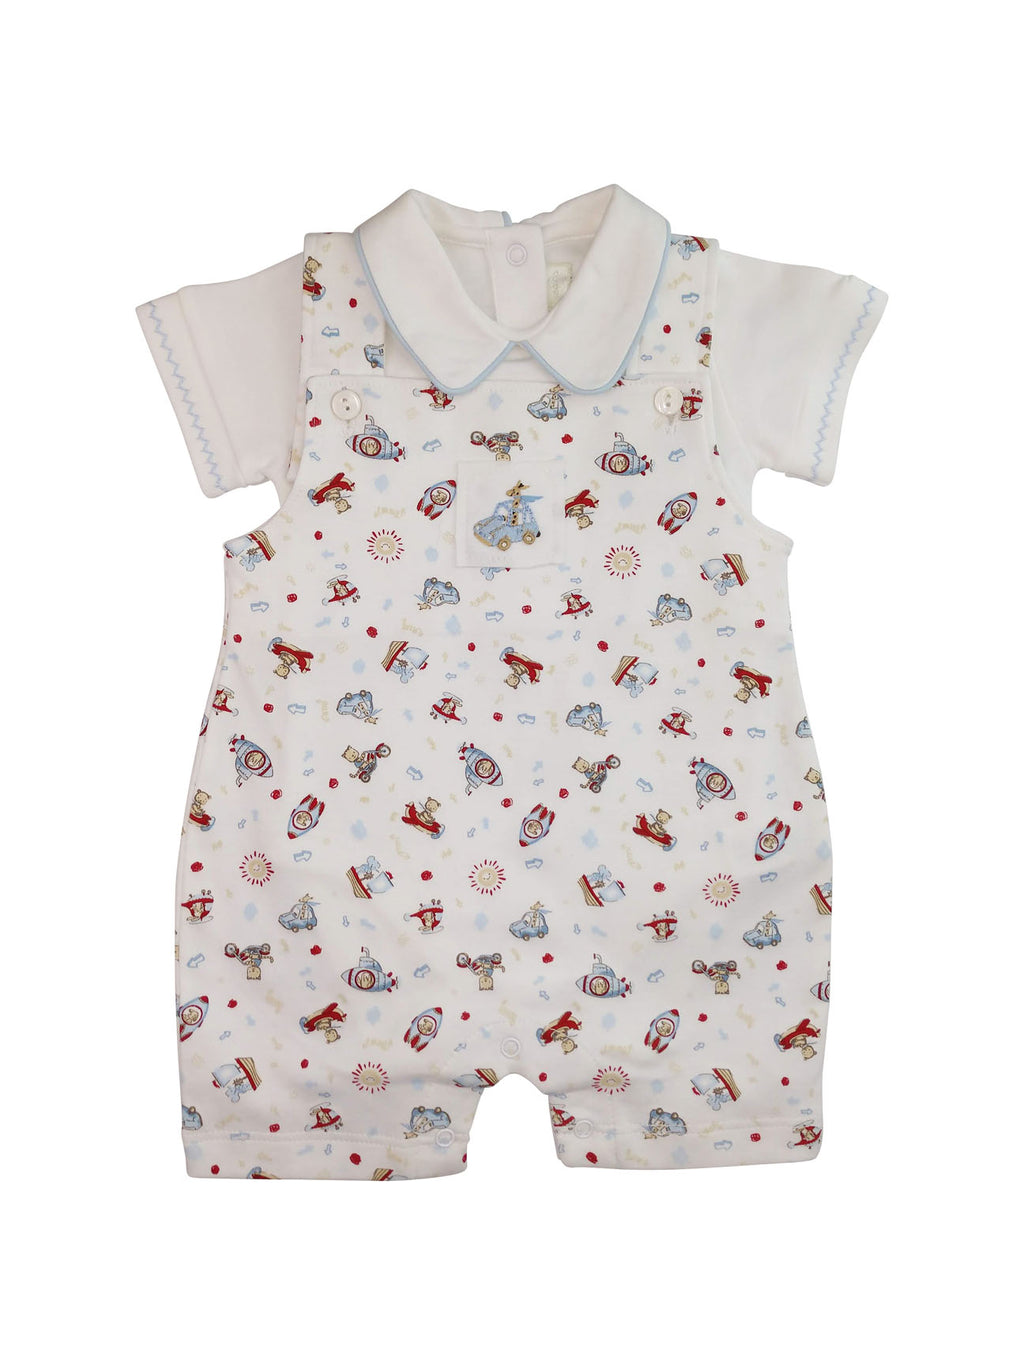 Pima Cotton Kids & Baby Clothes - Baby Threads - Marco and Lizzy ...